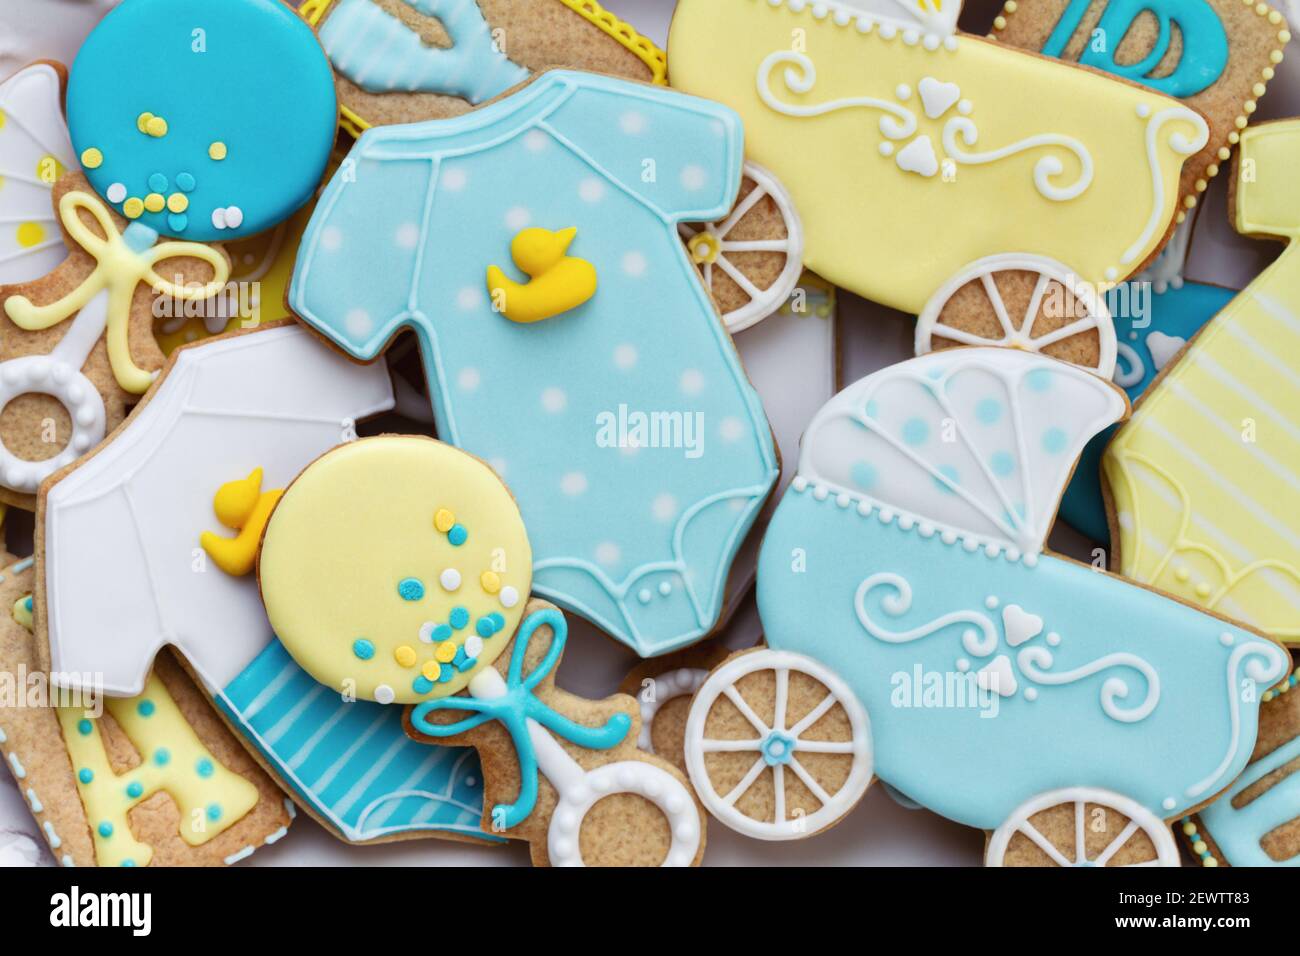 Assortment of decorated baby shower cookies, overhead view Stock Photo